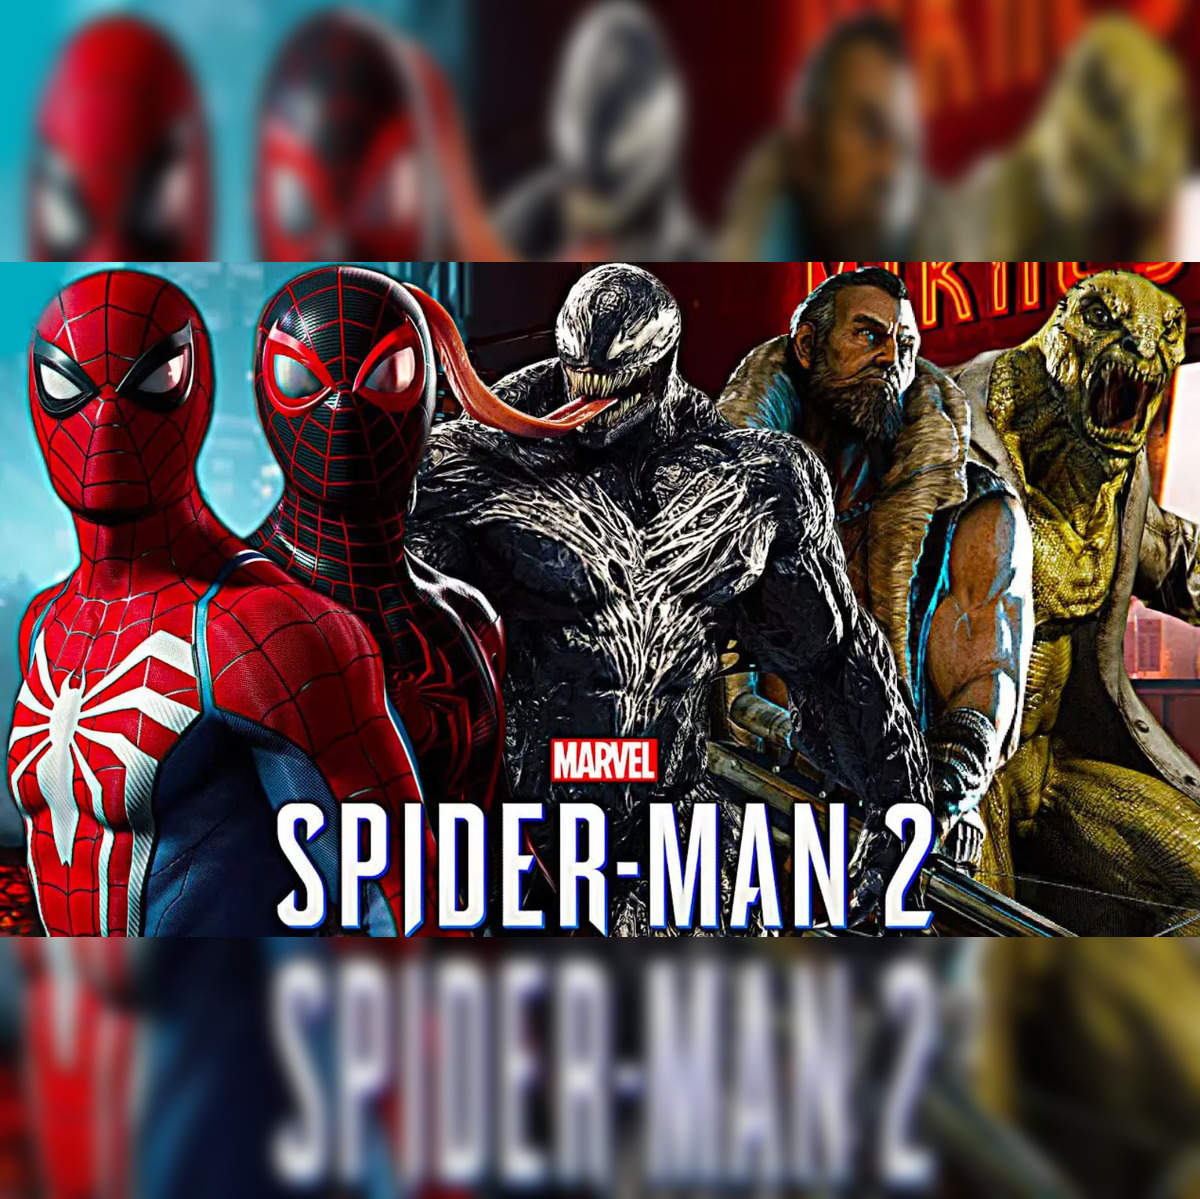 Everything You Need To Know Before Playing 'Marvel's Spider-Man 2